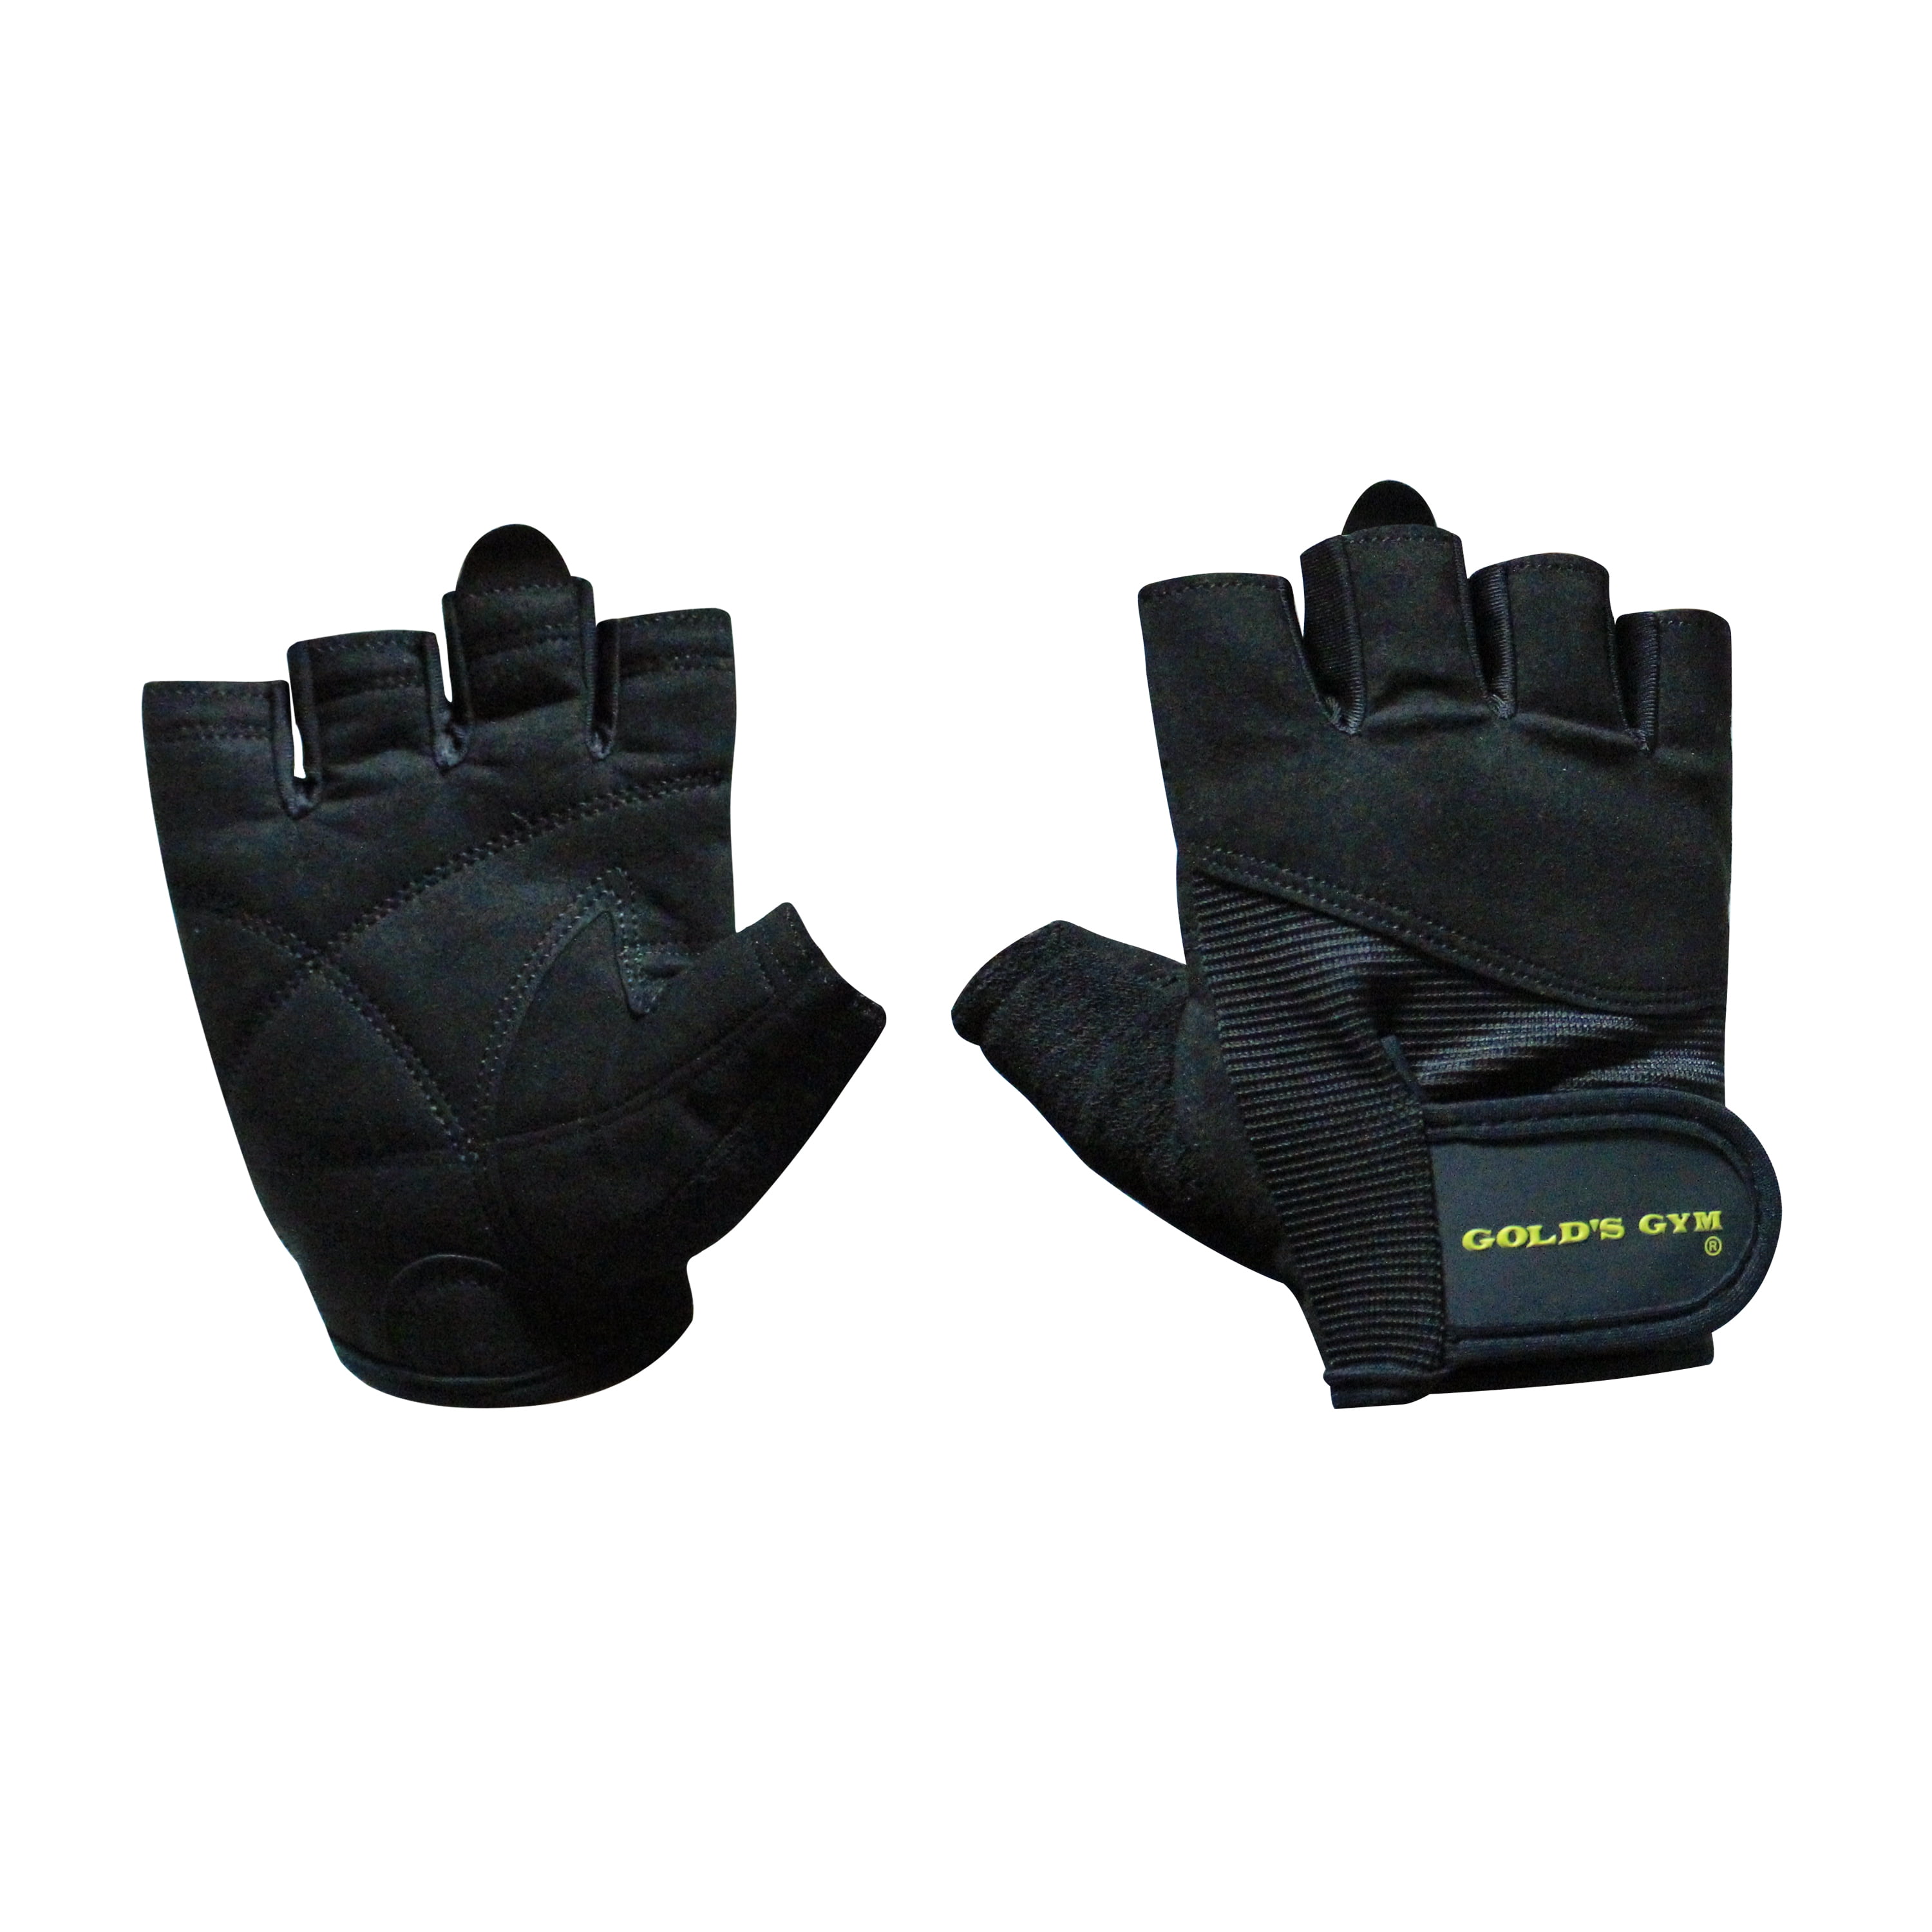 Medium Mesh Back Leather Gloves Weight lifting Fitness Training Cycle Wheelchair Glove